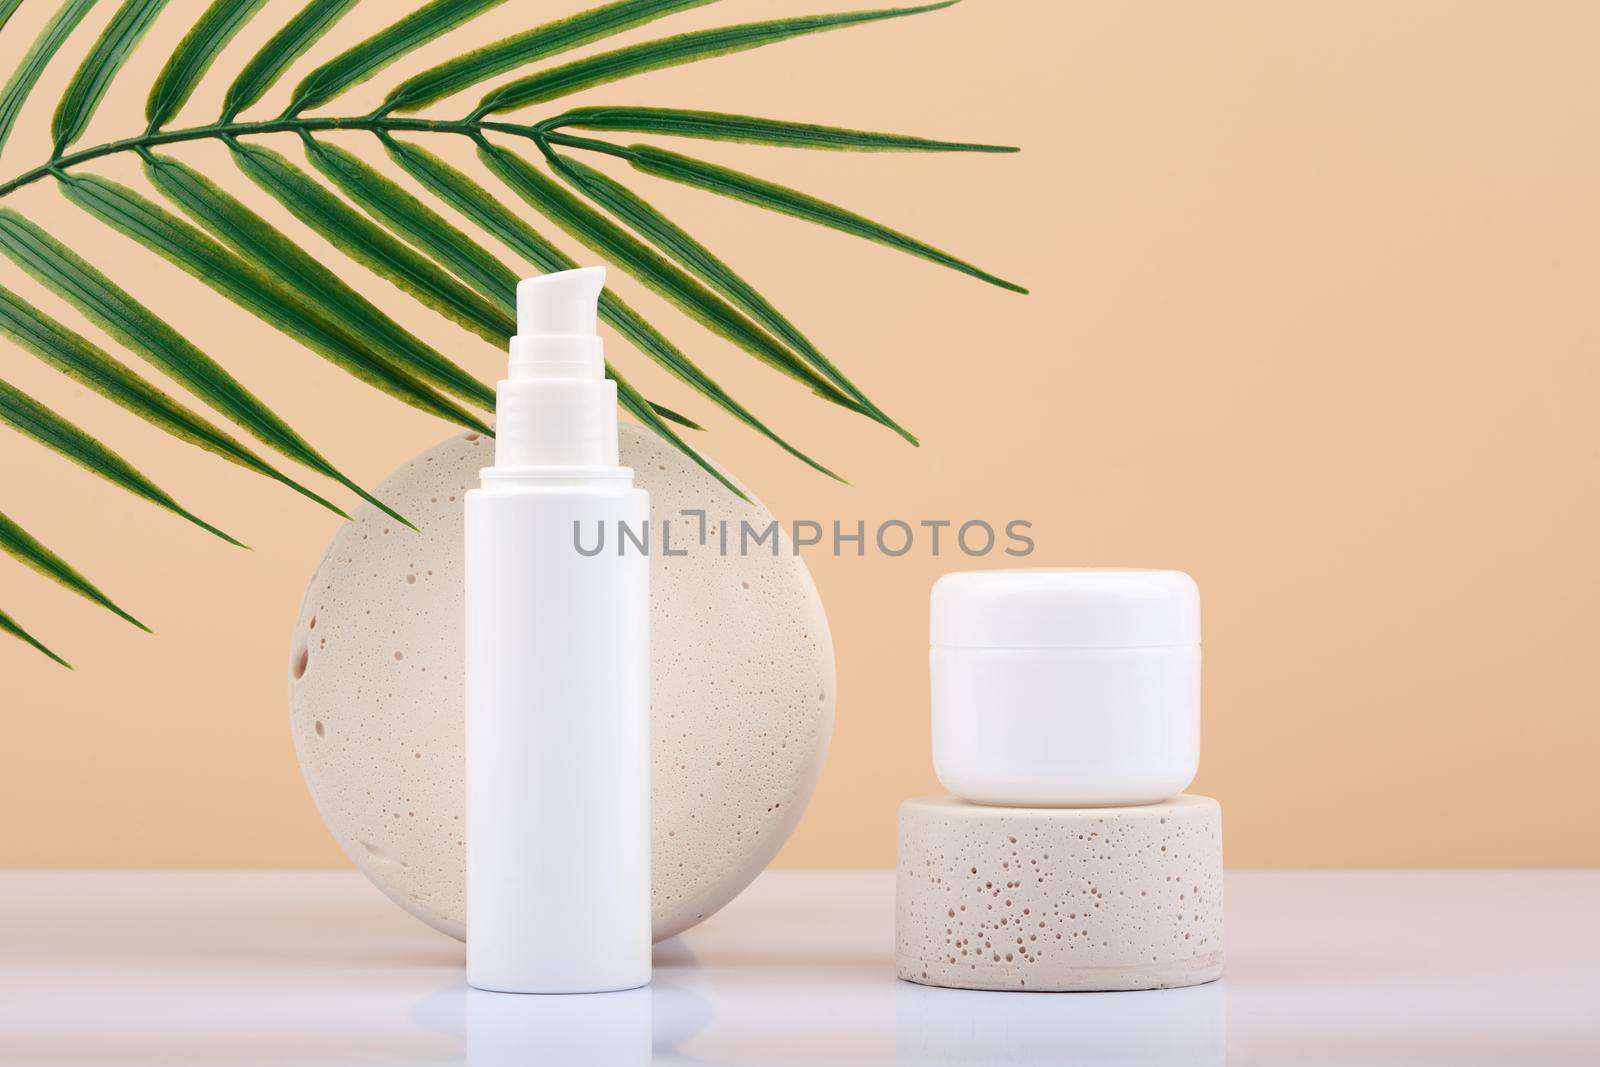 Face cream and under eye cream against beige background with palm leaf. Beauty products for woman. Daily skin care routine concept